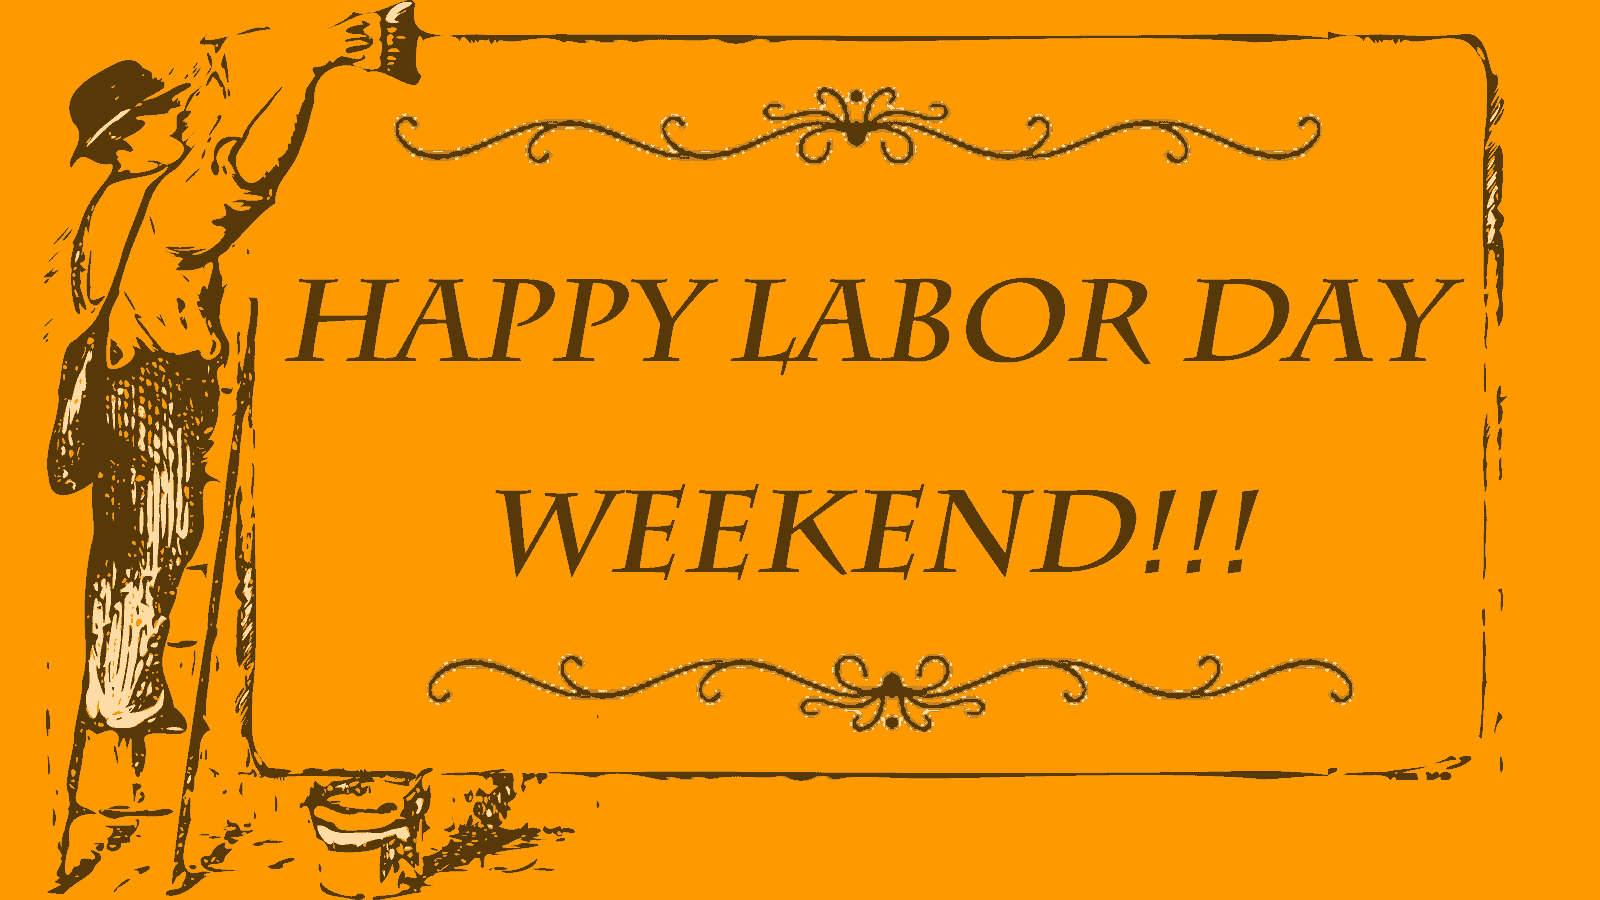 LABOR DAY 2020 WEEKEND Happy Labor Day Image Free Download 2020